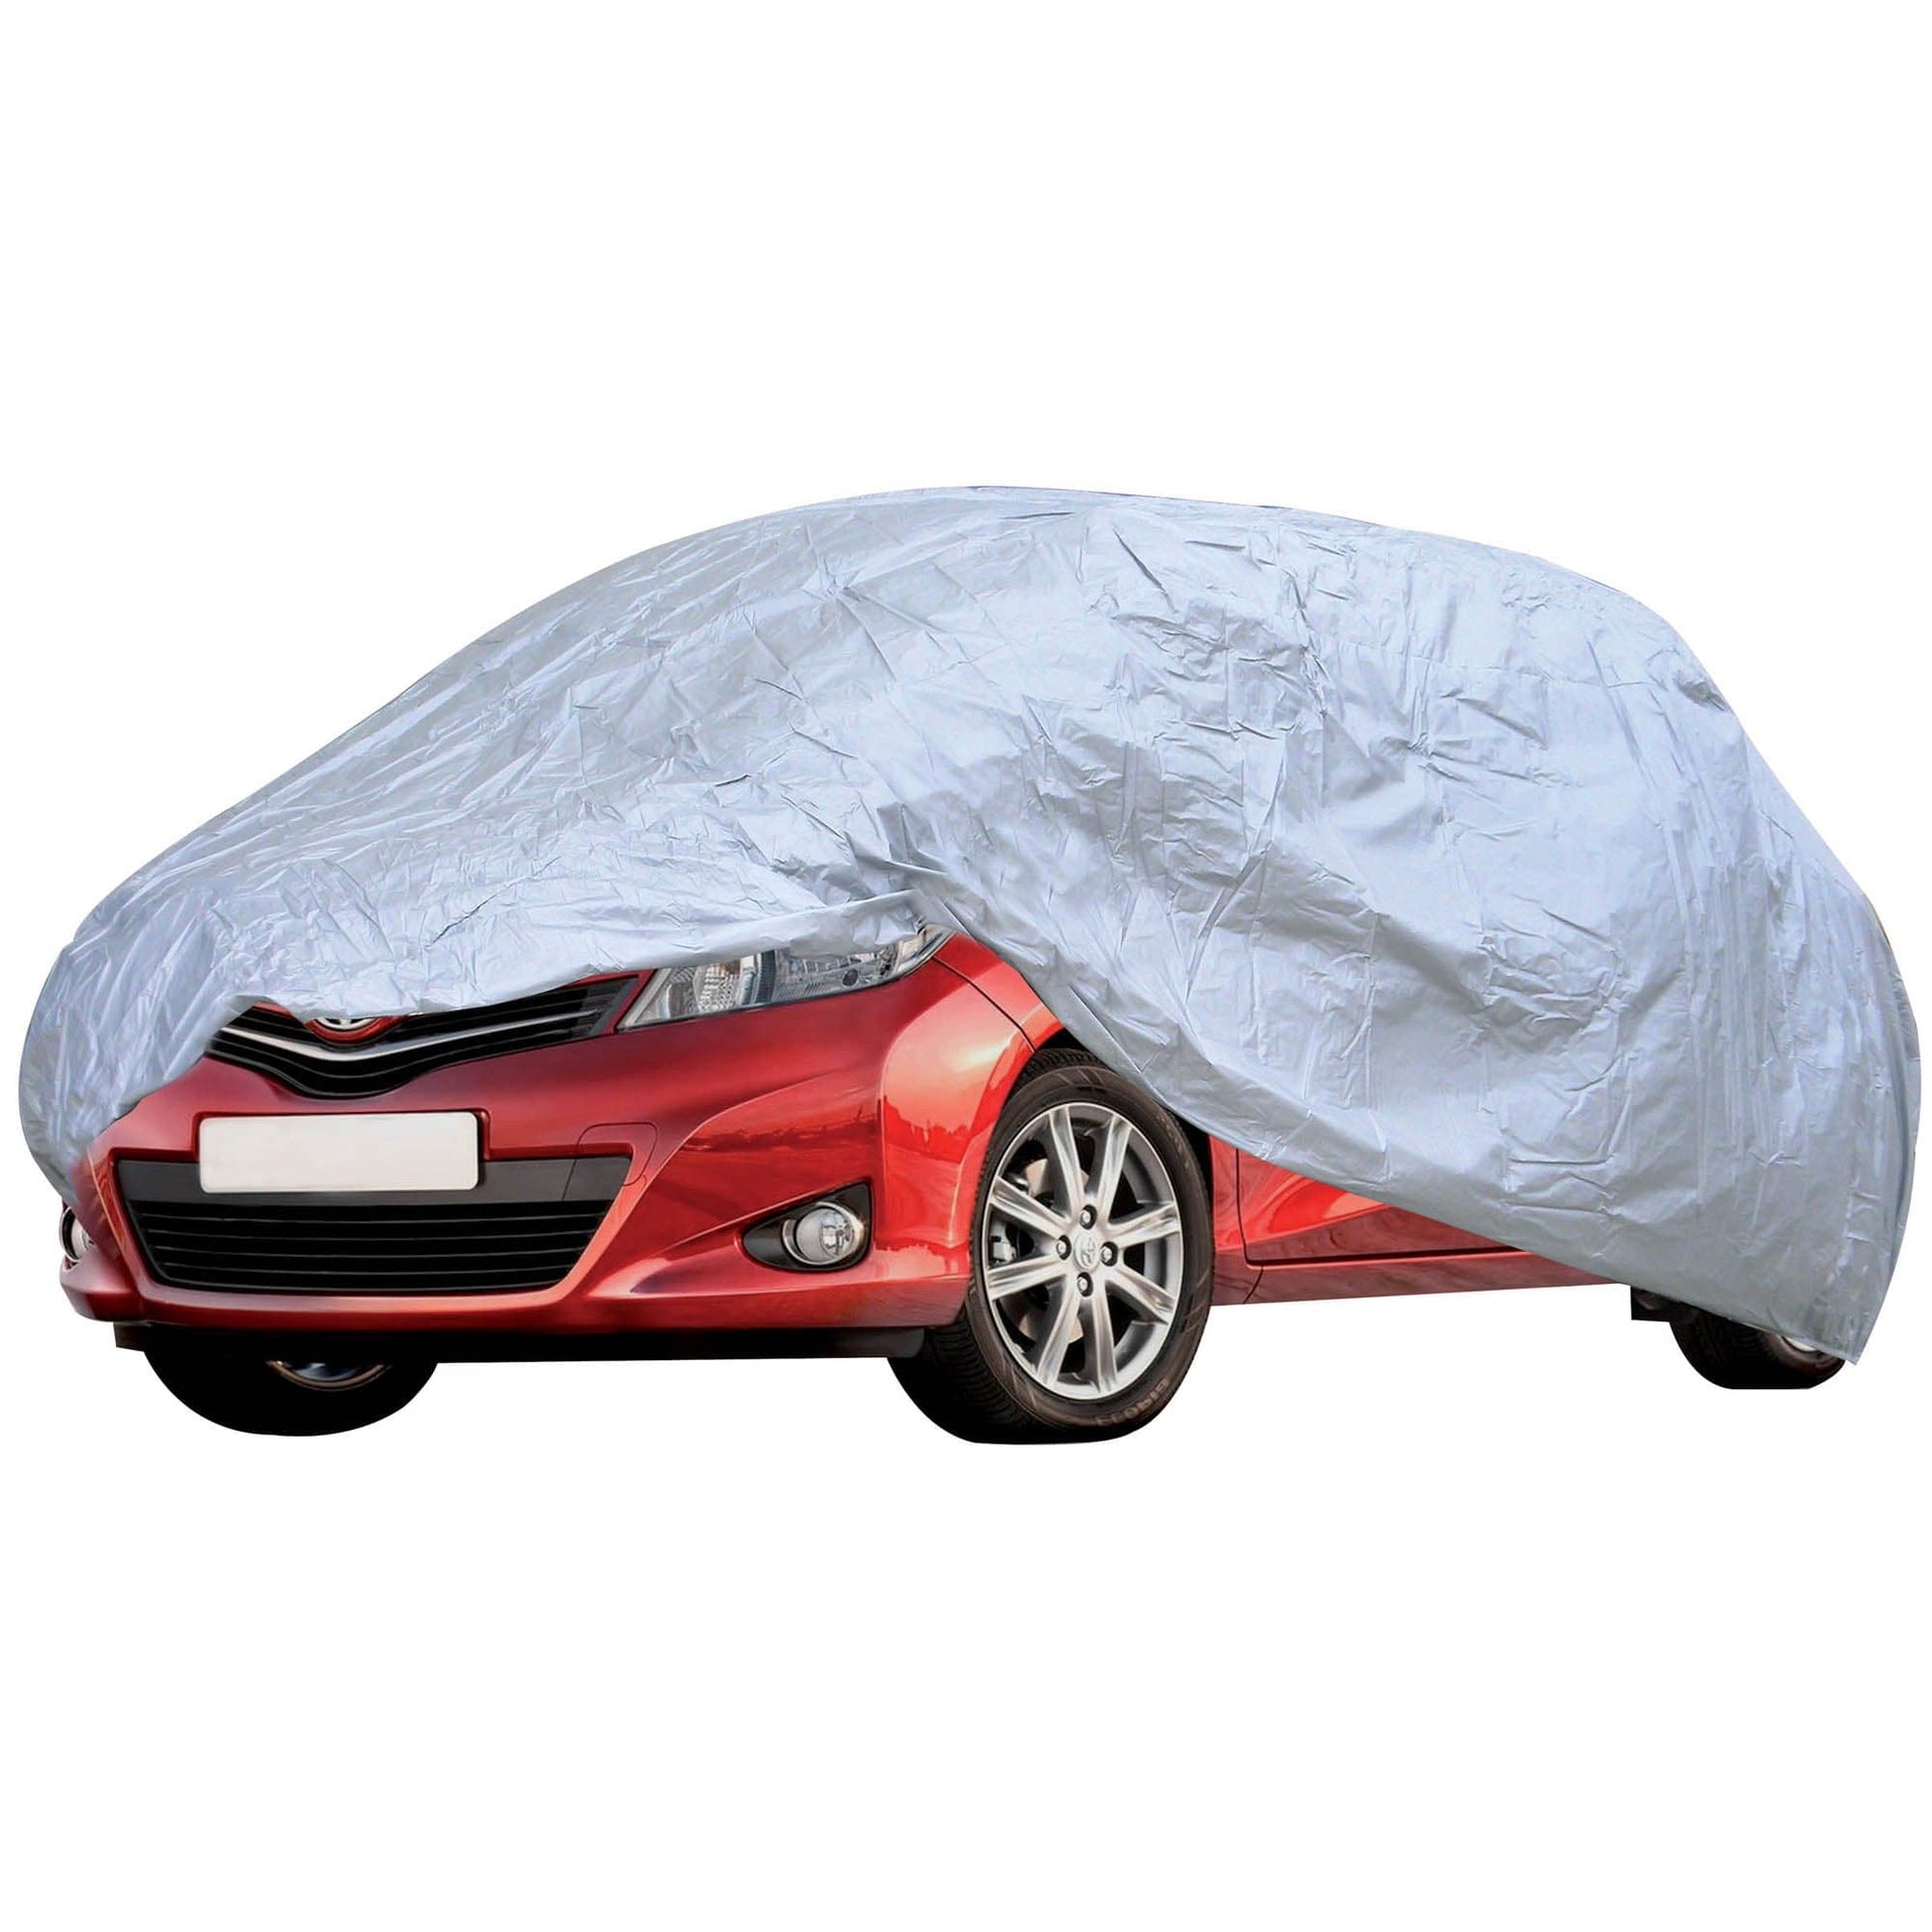 WATERPROOF CAR COVER SIZE M - best price from Maltashopper.com BR490000823